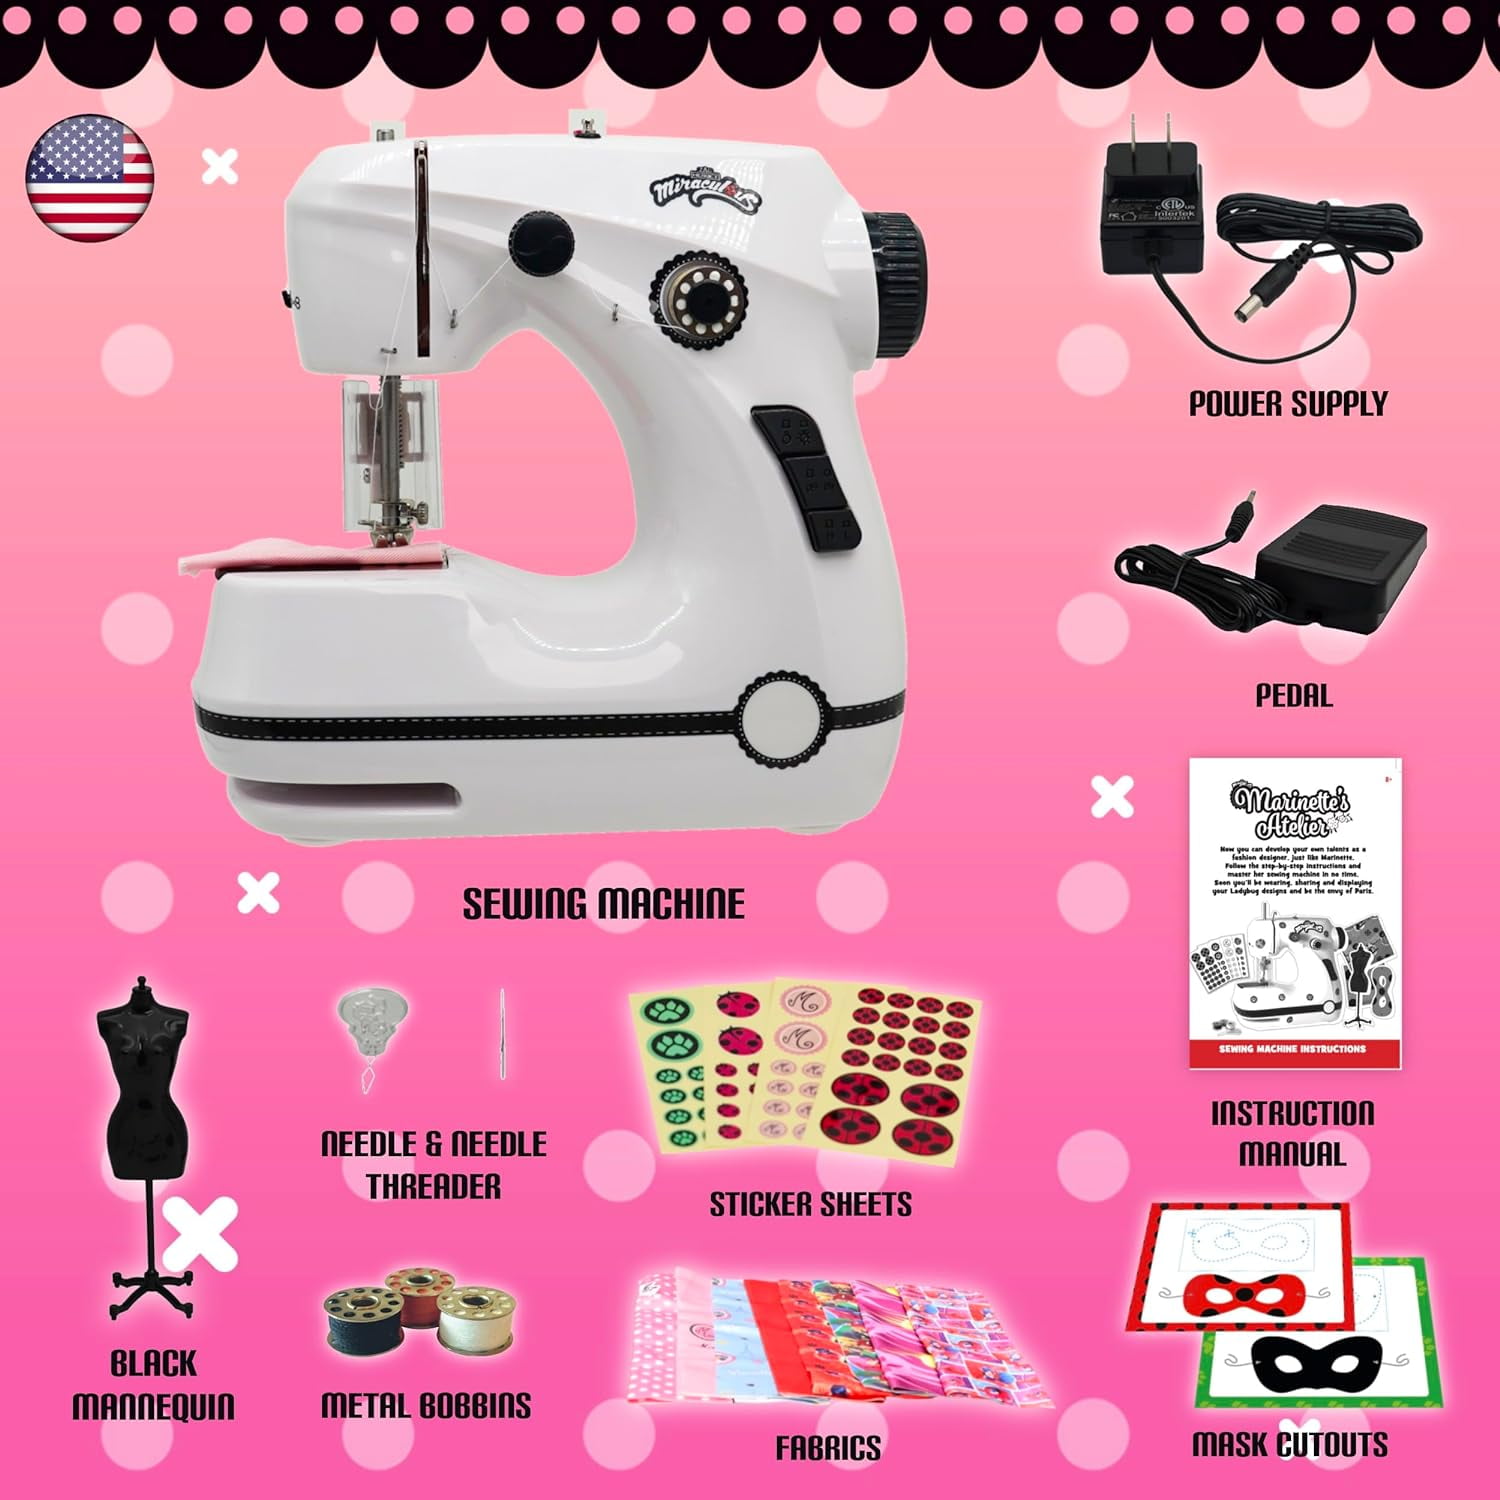 Miraculous Ladybug Marinette's Mini Portable Sewing Machine For Kids, Dual  Speed With Fabric, Black Mannequin, Superhero Mask Cutouts, And Foot Pedal  : Target